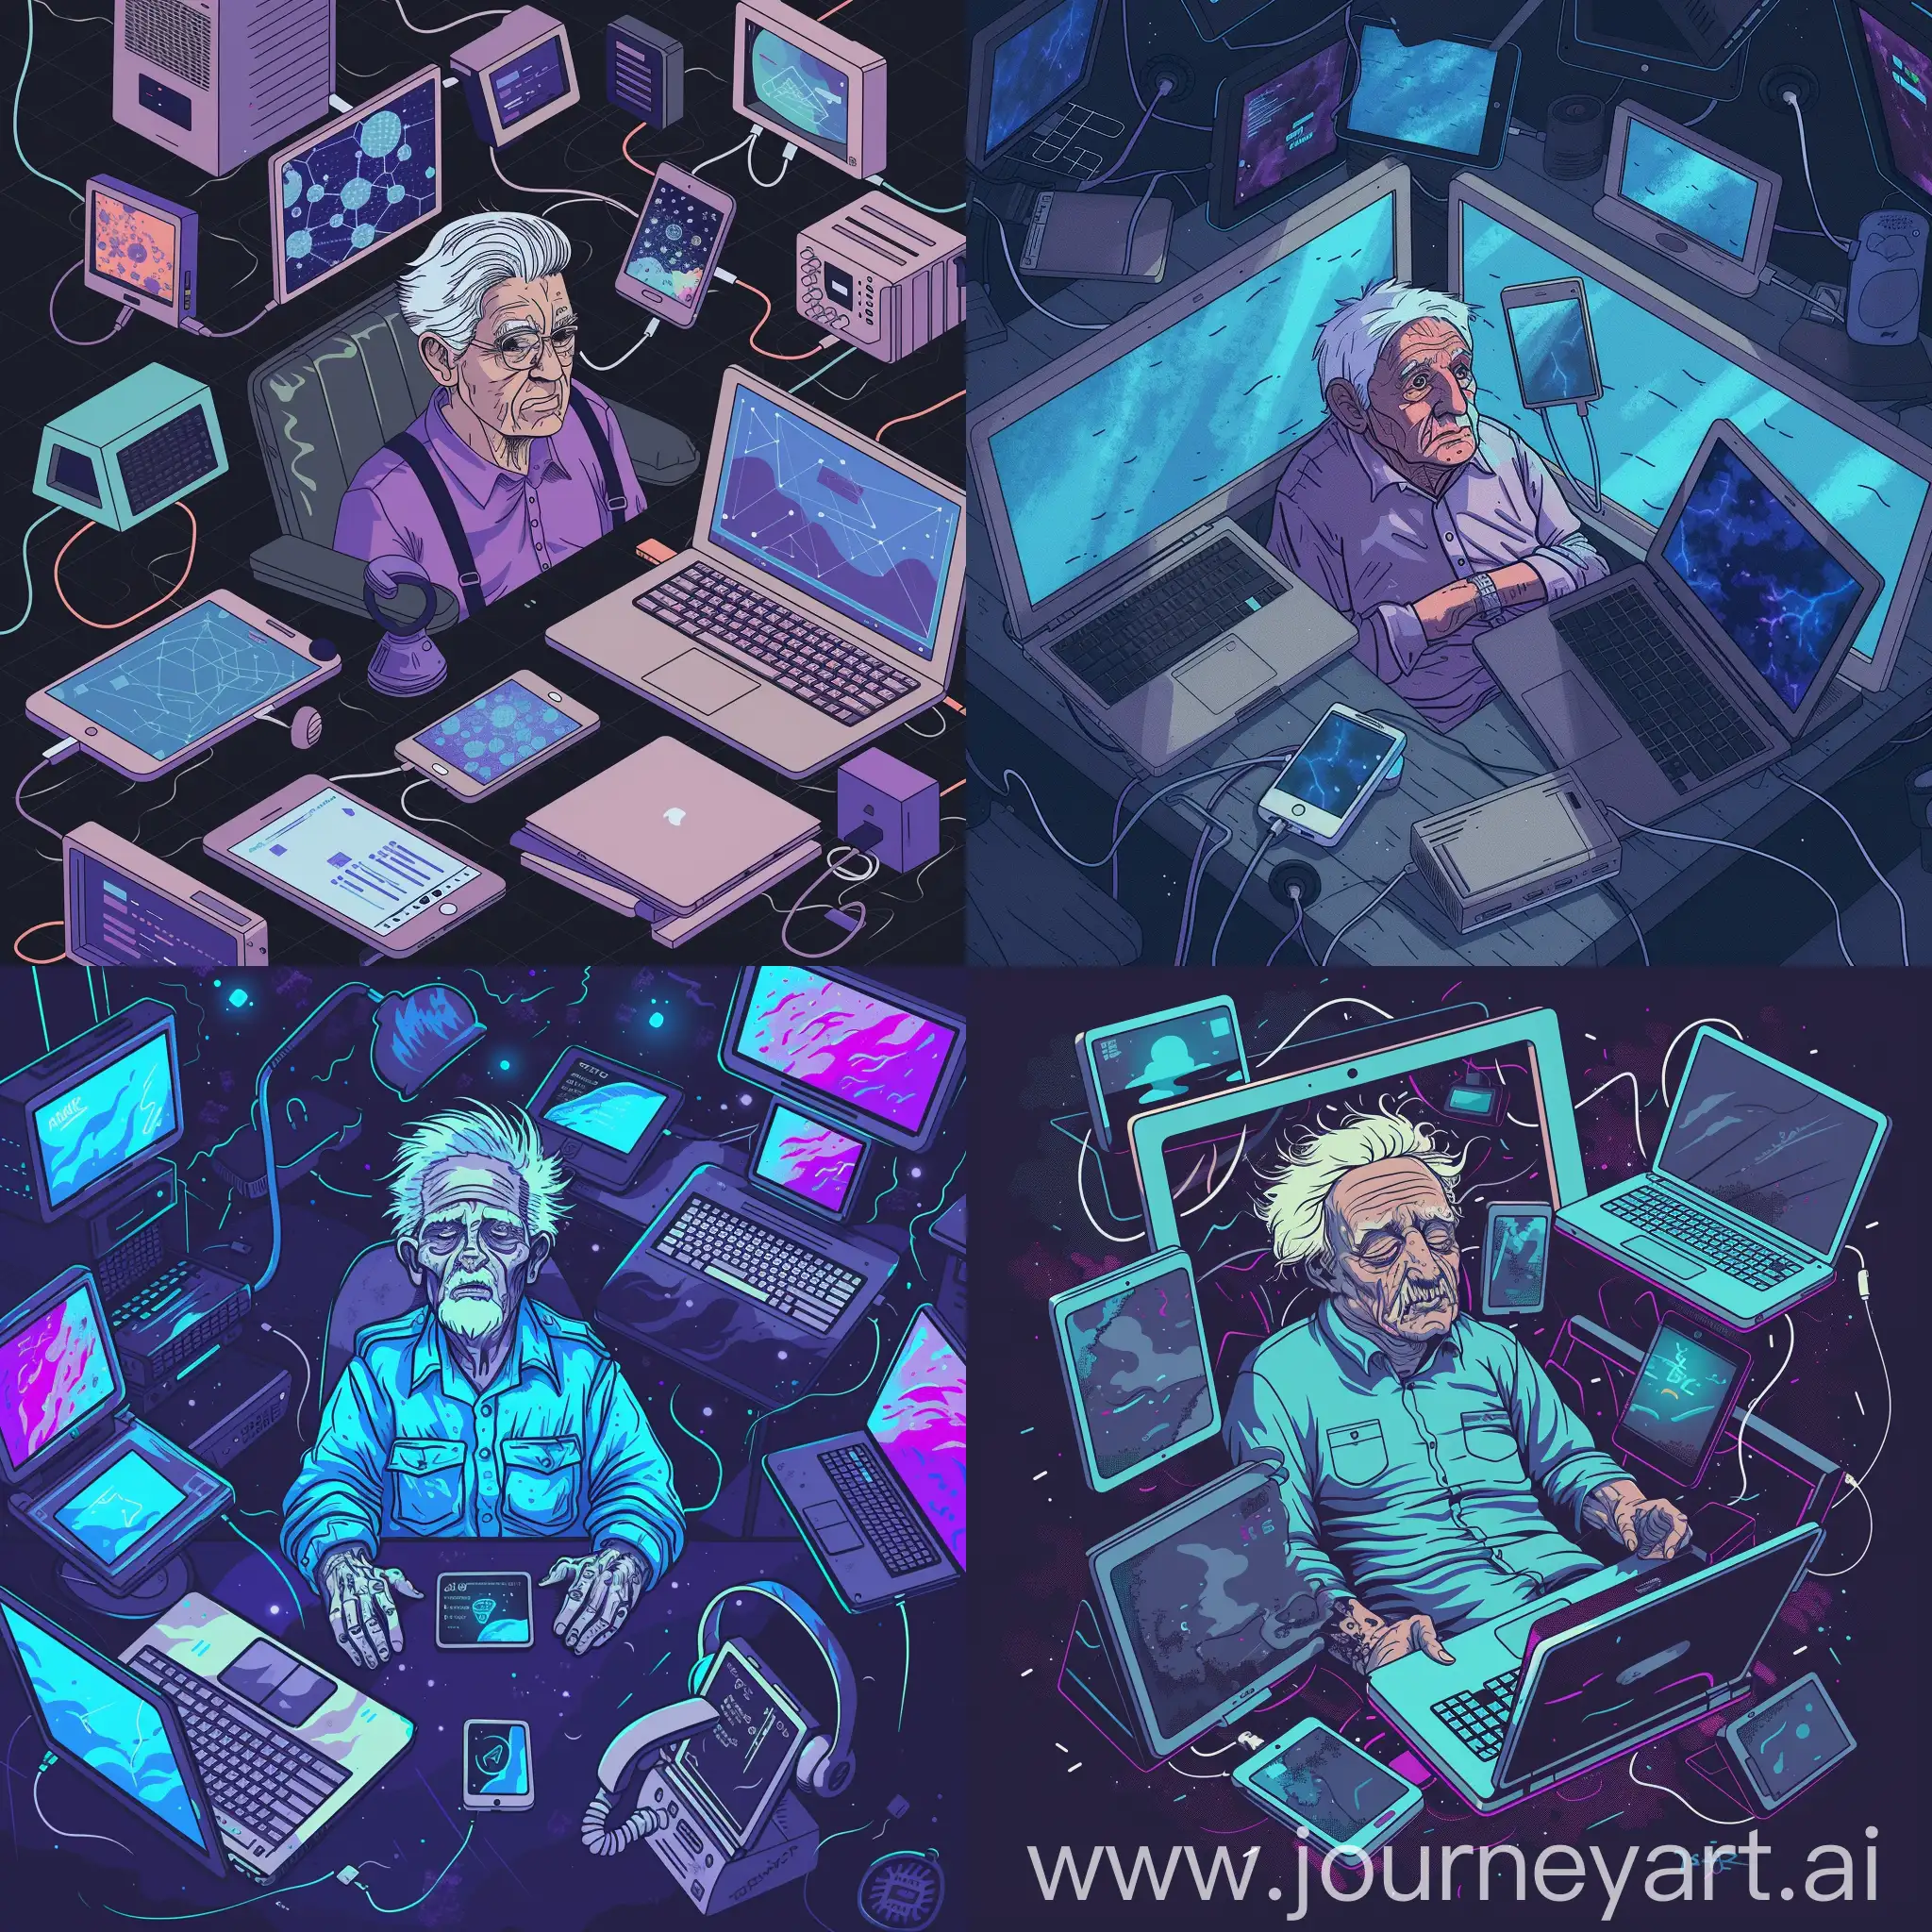 
I intend to design an NFT artwork using digital art. My NFT has the following characteristics and details:

The image type should be digital art.

Human interaction in modern societies has been influenced by factors such as technology and innovation. An elderly man is depicted inside a room surrounded by communication devices such as smartphones, laptops, and a computer phone. However, due to excessive use of virtual space and social media, his interaction in the real world has decreased. He has lost his non-physical communication skills due to constant use of messaging apps and social networks, and has difficulty in creating and maintaining personal relationships, feeling intensely lonely. The use of technology may alter social behaviors, such as reducing interpersonal interactions and social skills like social etiquette. Overall, the use of technology can have effects on human interactions, but it is important for individuals to have the ability to manage and control their usage to prevent the decline of human interaction.

The color patterns I have in mind for this design include:

Absolute Blue: #0D47A1
Aubergine Purple: #4527A0
Dark Slate: #263238
Leather Black: #212121
Blue White: #E0F7FA

